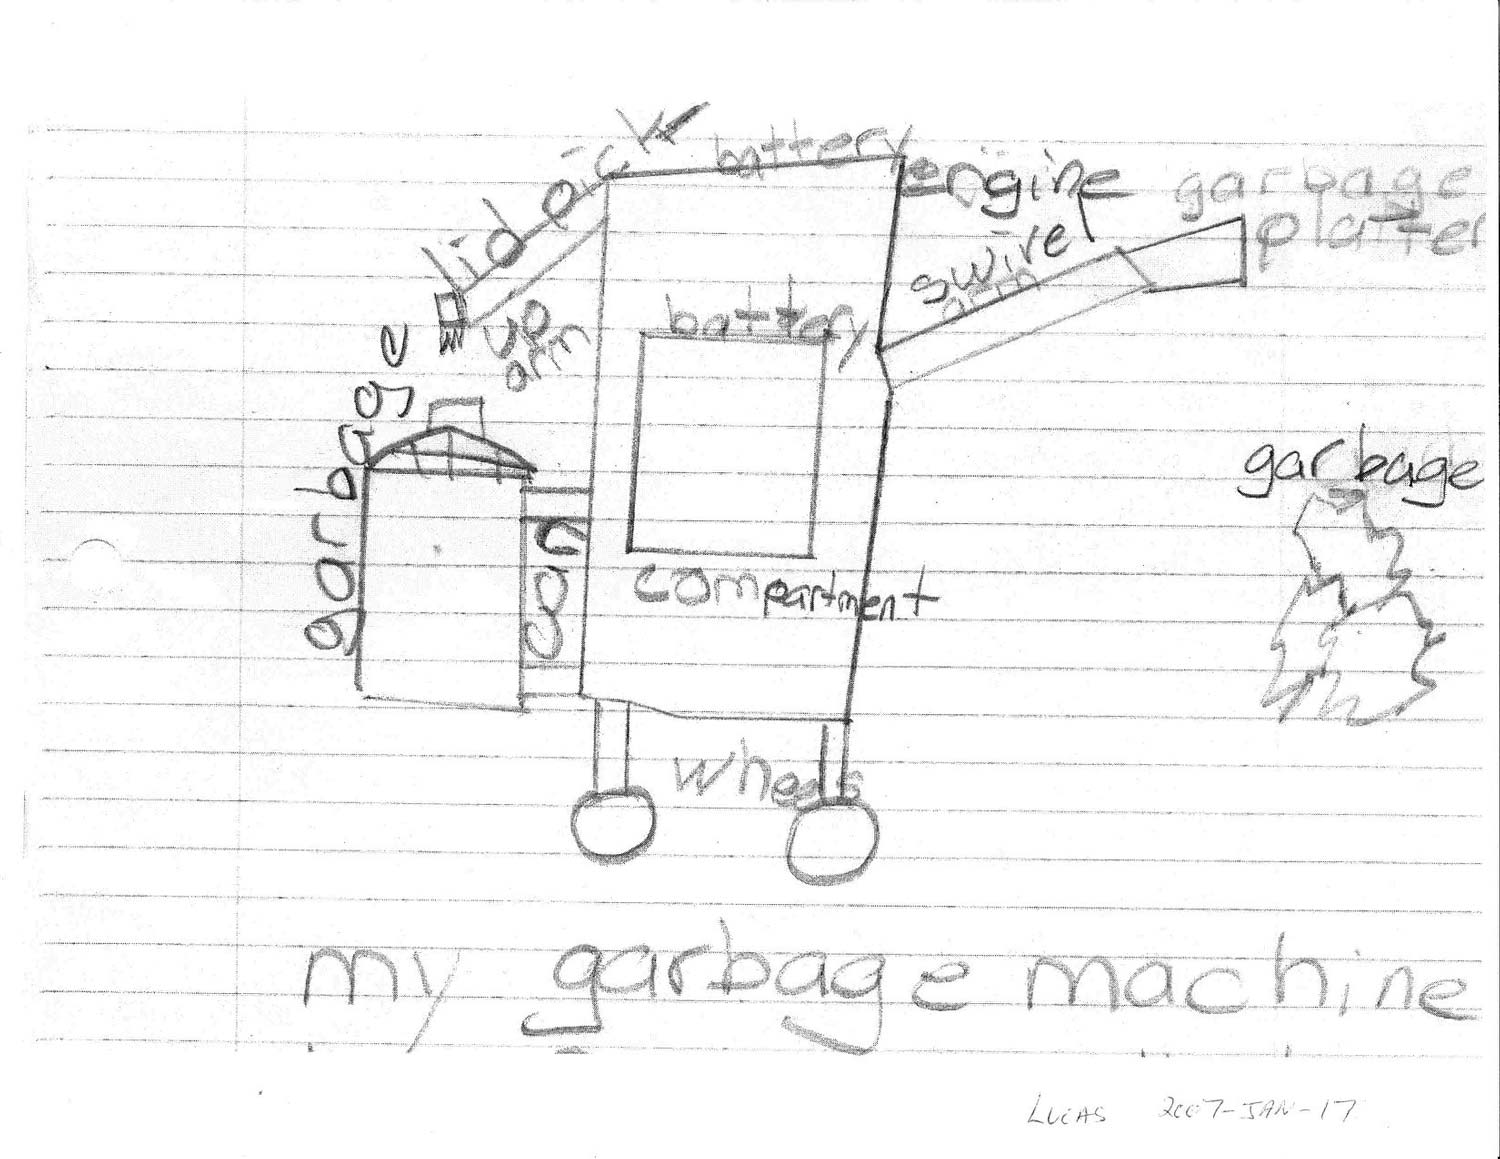 A hand-drawn diagram of a garbage picker-upper, from January 17, 2007